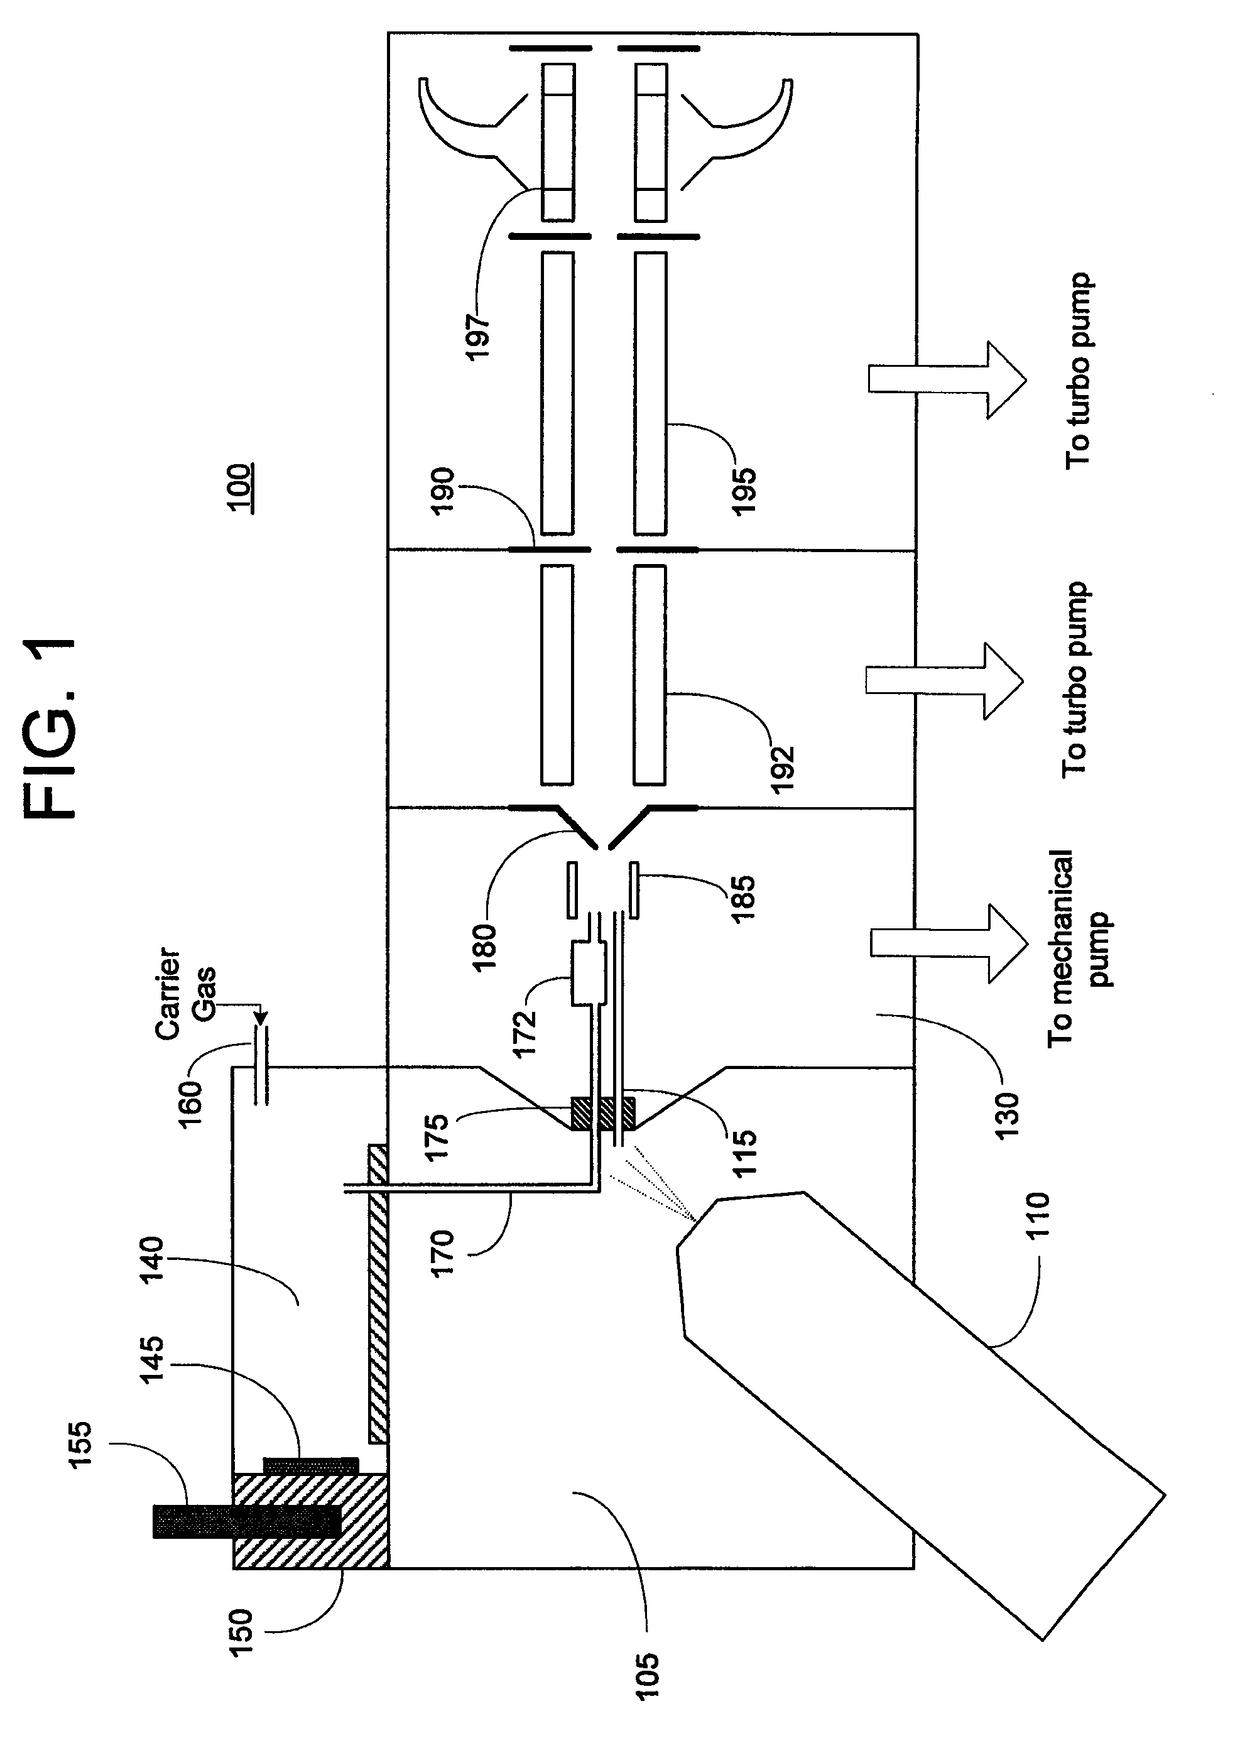 Method and apparatus for generation of reagent ions in a mass spectrometer